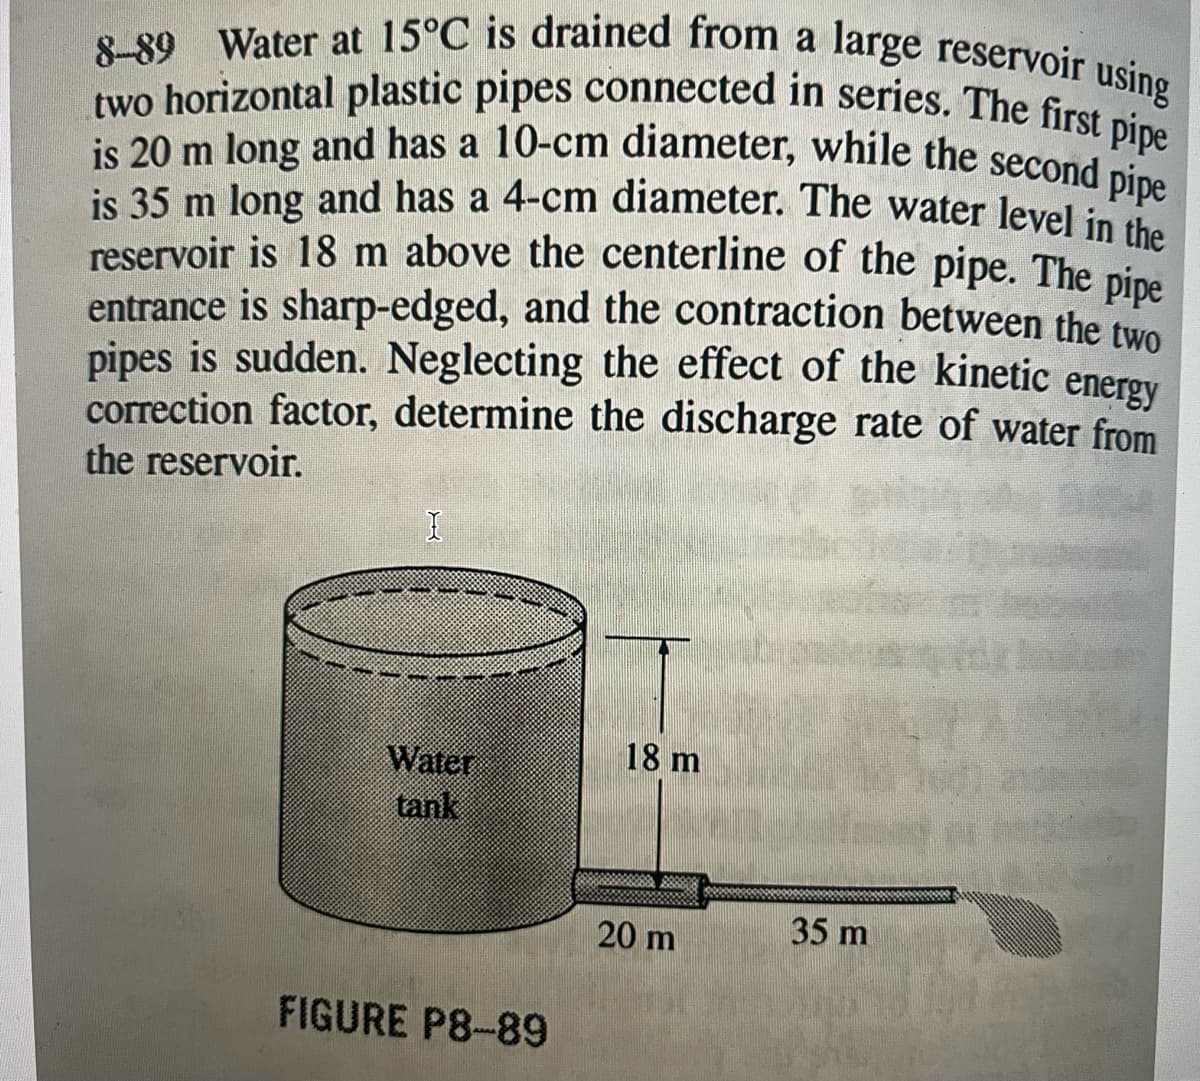 8-89 Water at 15°C is drained from a large reservoir using
two horizontal plastic pipes connected in series. The first pipe
is 20 m long and has a 10-cm diameter, while the second pipe
is 35 m long and has a 4-cm diameter. The water level in the
reservoir is 18 m above the centerline of the pipe. The pipe
entrance is sharp-edged, and the contraction between the two
pipes is sudden. Neglecting the effect of the kinetic
energy
correction factor, determine the discharge rate of water from
the reservoir.
I
Water
tank
FIGURE P8-89
18 m
20 m
35 m